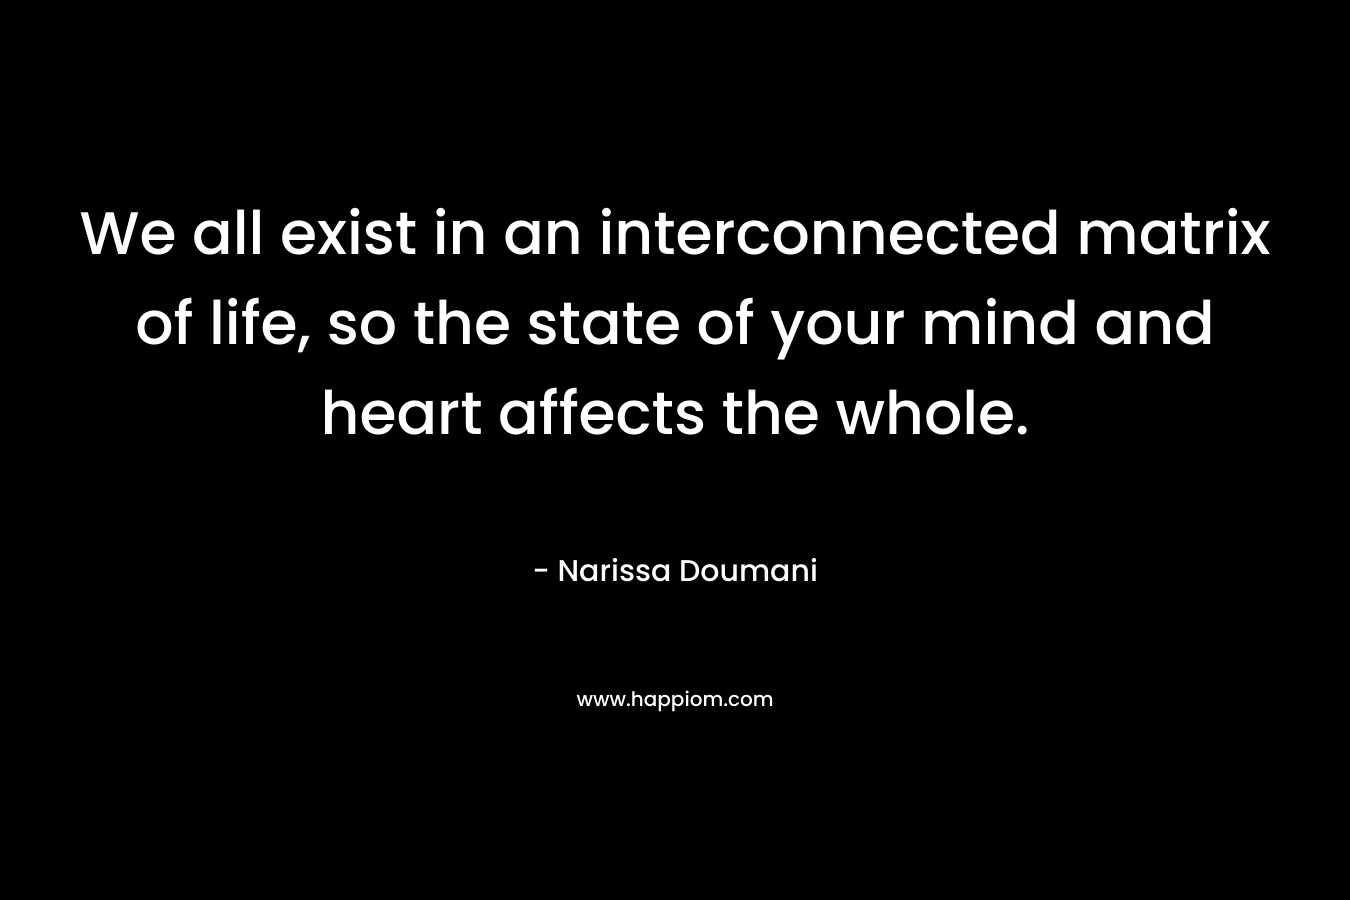 We all exist in an interconnected matrix of life, so the state of your mind and heart affects the whole. – Narissa Doumani